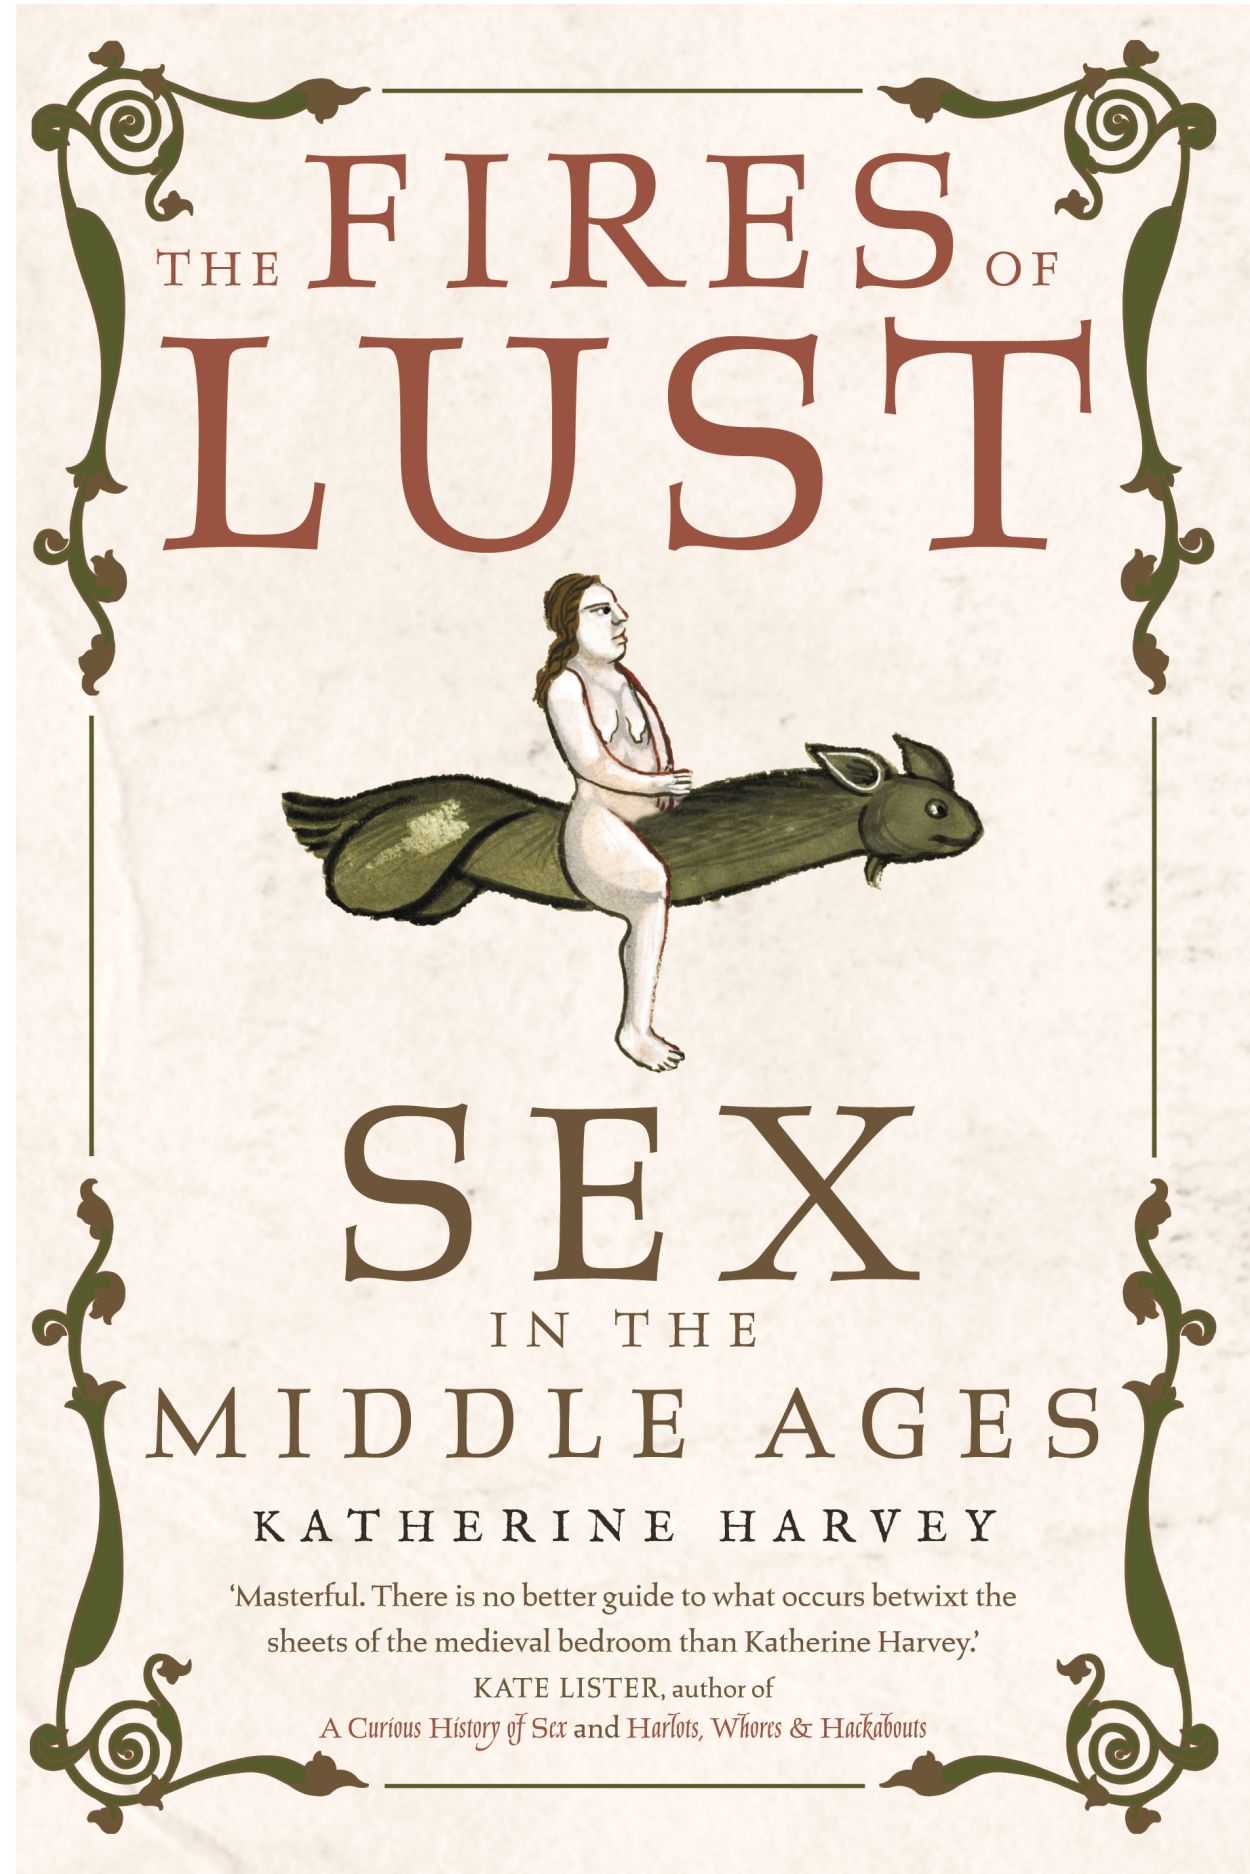 The Fires of Lust Sex in the Middle Ages, Harvey pic